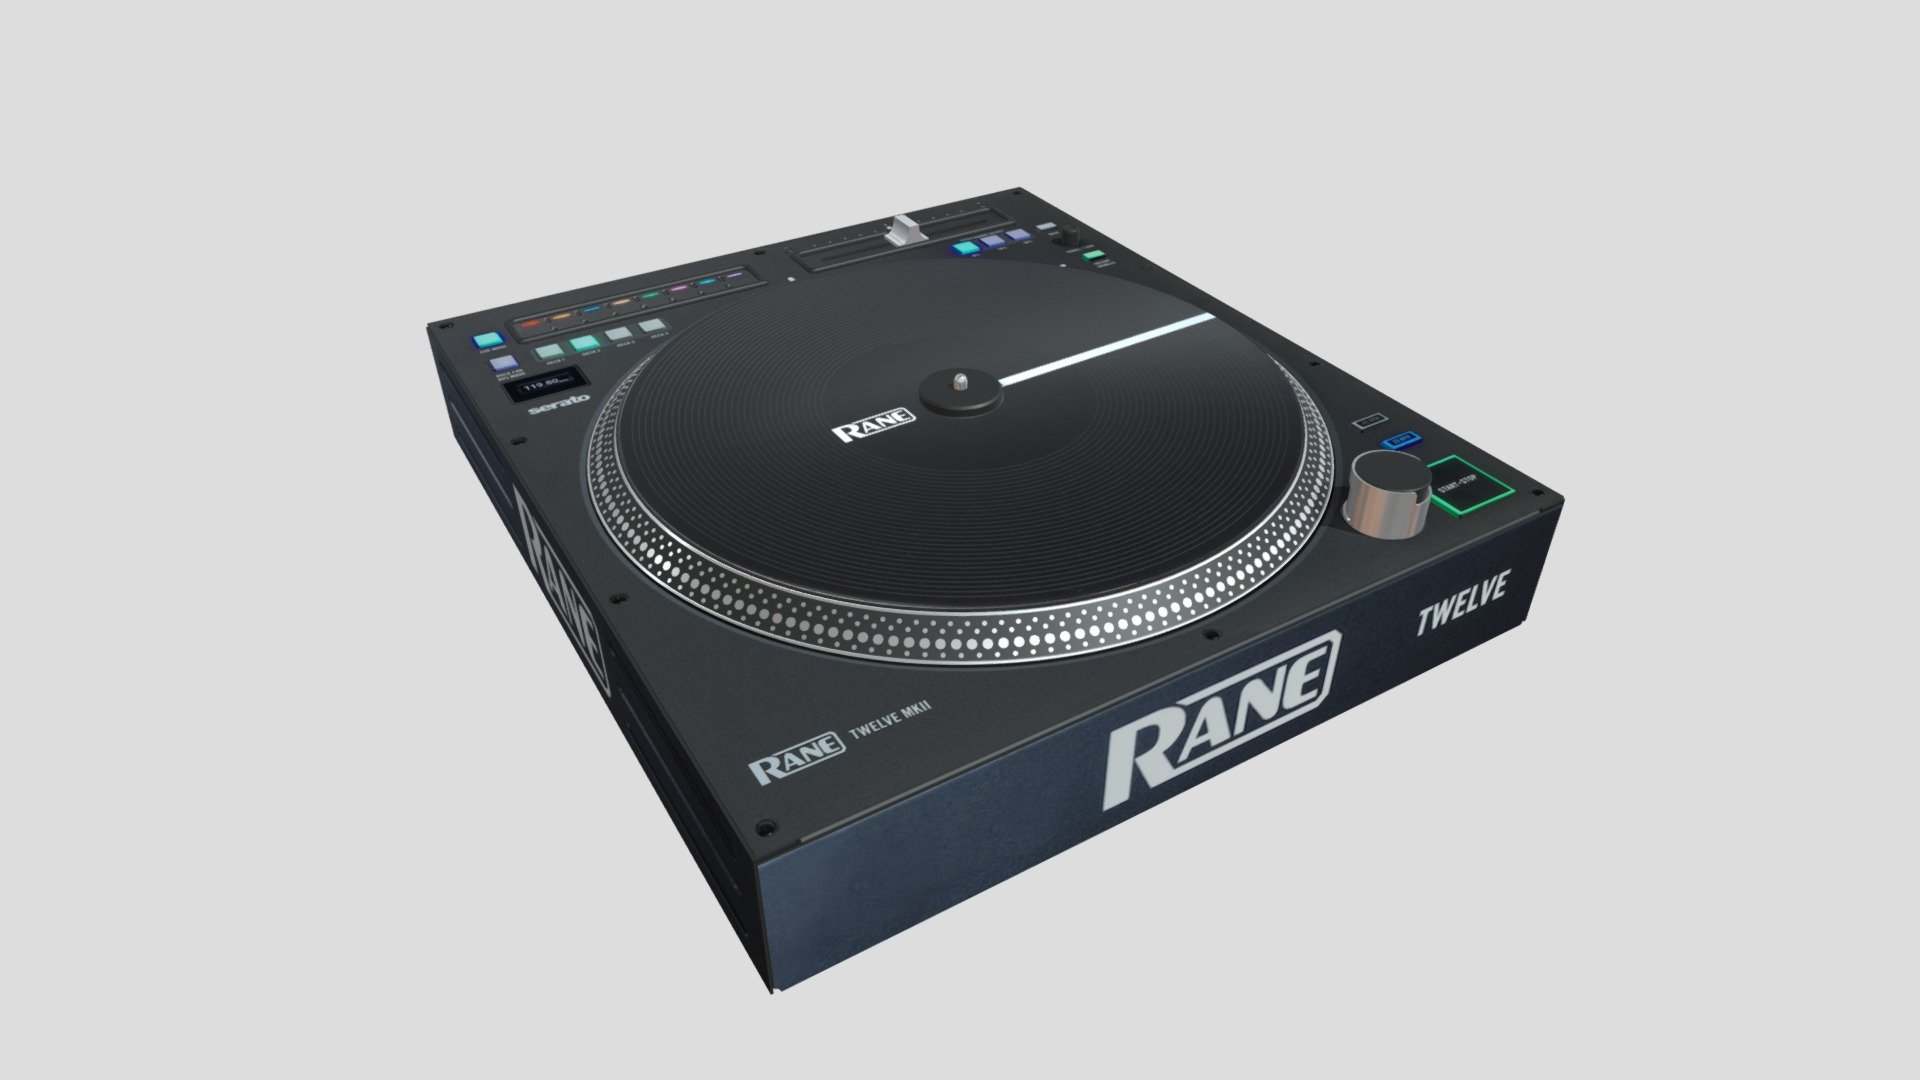 Rane12 MKII controller
Gives that technics and real vinyl feel to a controller you can link up to Serato.
Two samll JPG textures 3d model